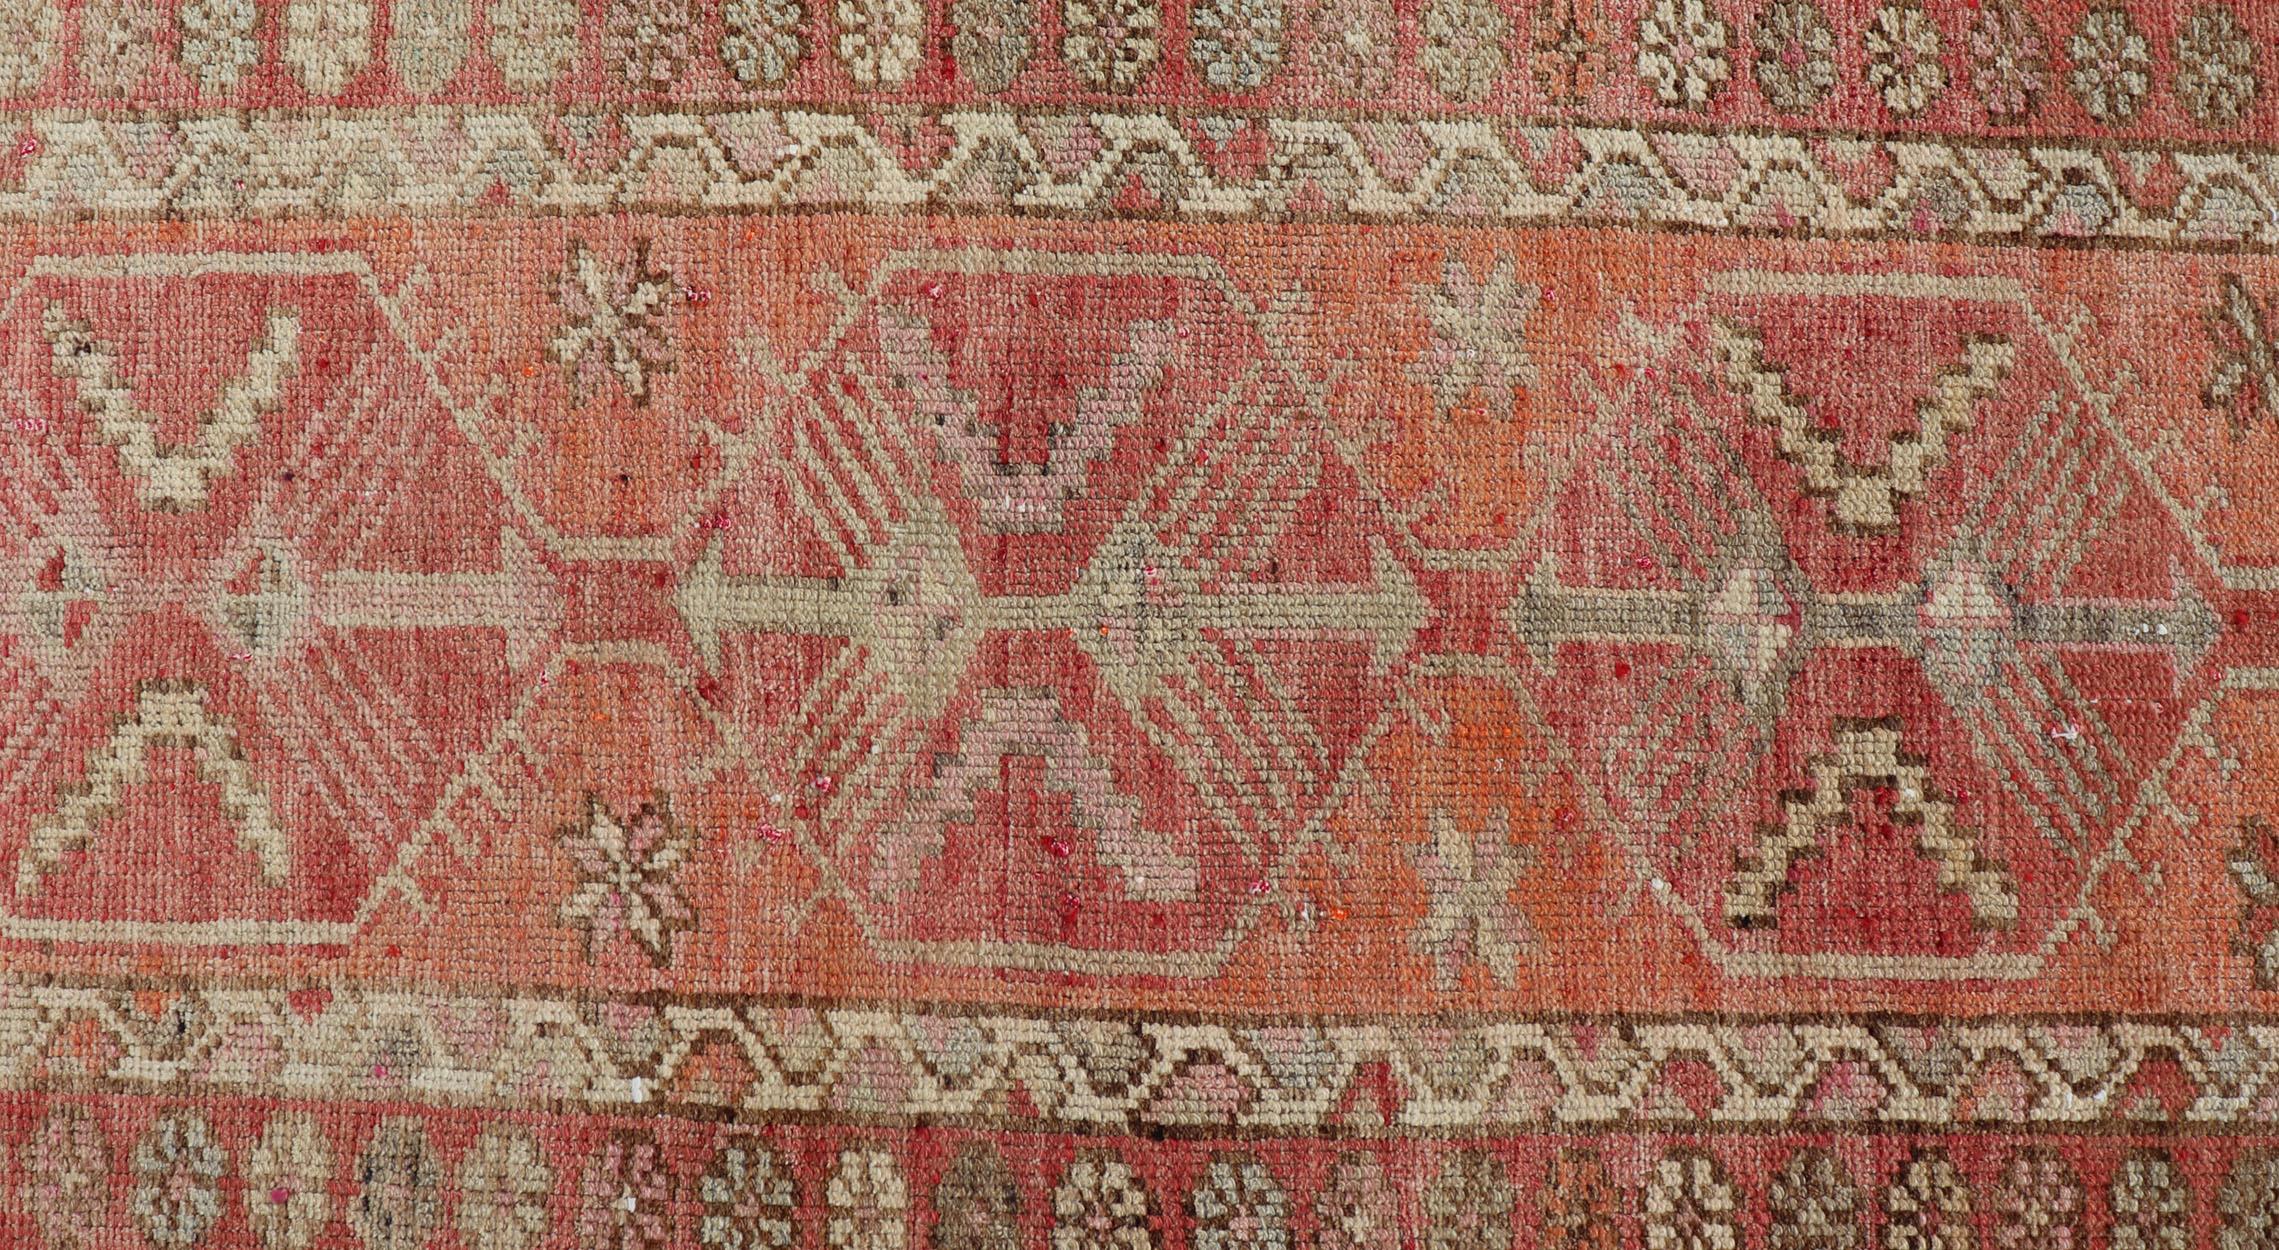 Measures: 2'10 x 14'7 
Vintage Turkish Runner with Tribal Medallion Design in Variegated Red. Keivan Woven Arts / rug TU-NED-4679, country of origin / type: Turkey / Oushak, circa 1940

This expansive runner from Turkey features a colorful pattern